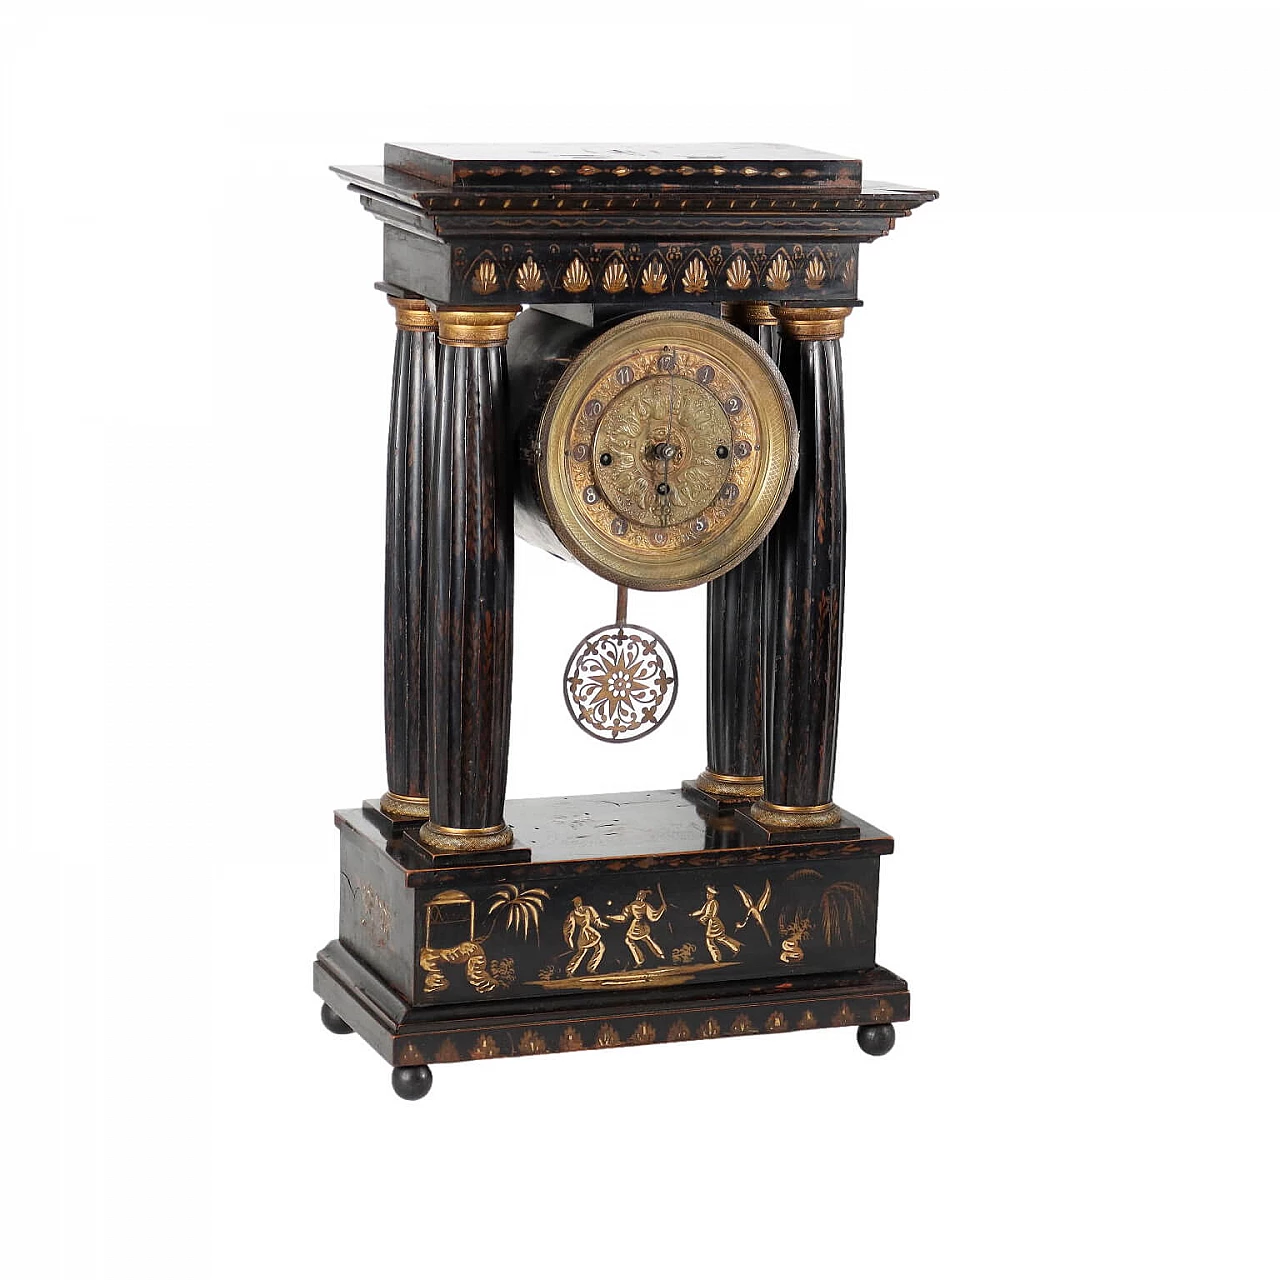 Wooden temple clock with chinoiserie decoration, 19th century 1